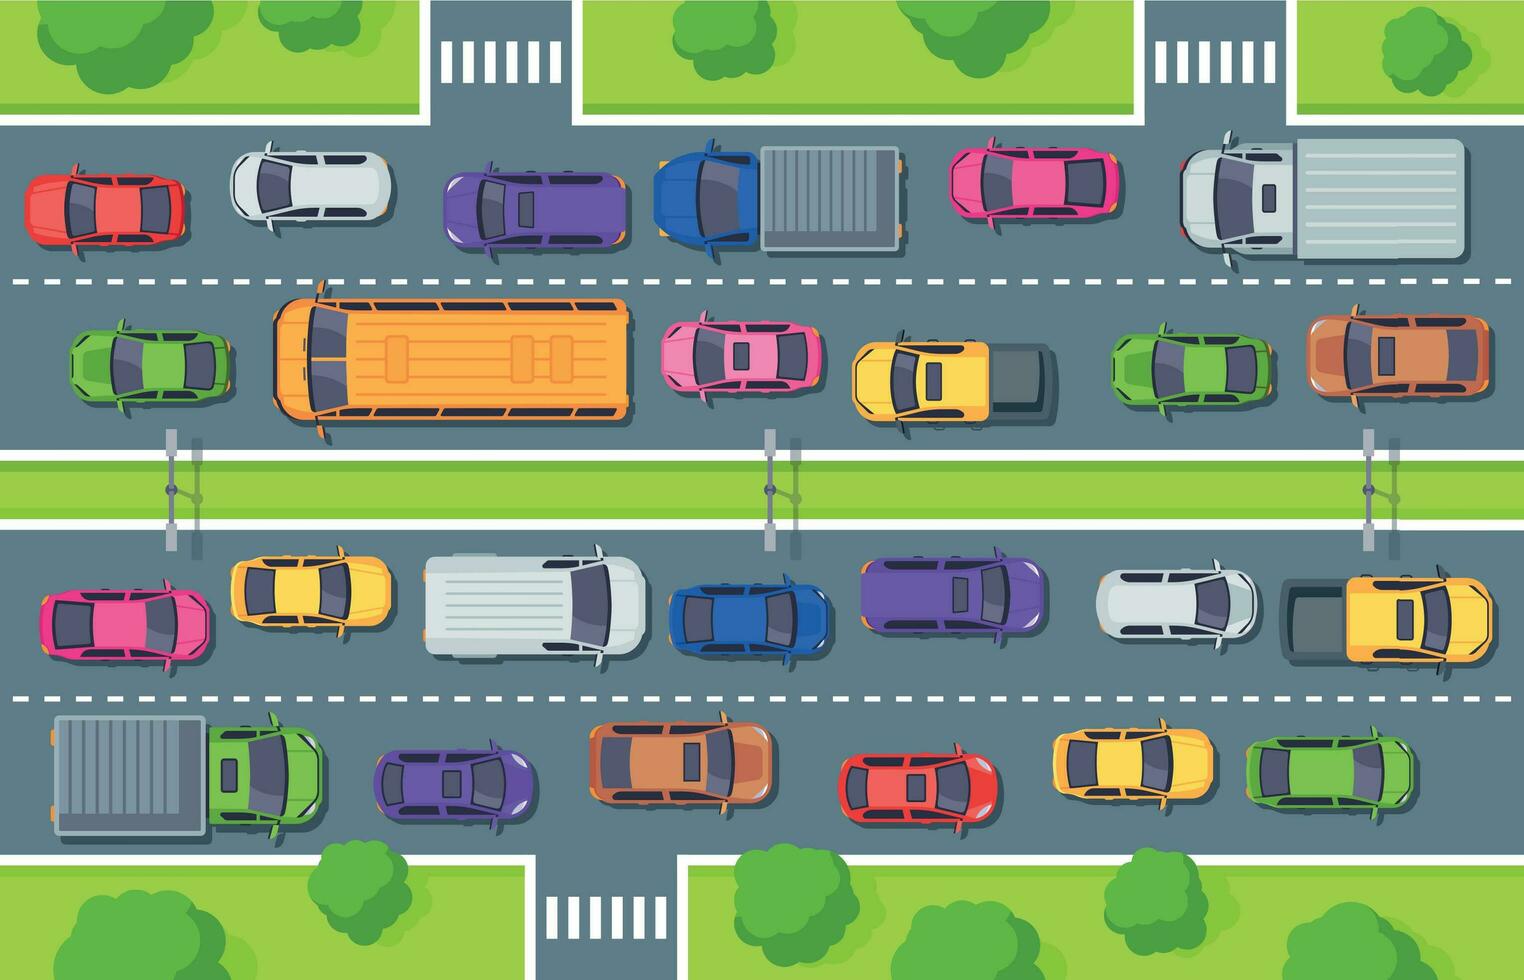 Traffic jam. Highway top view, trucks cars on road and car traffic control vector illustration